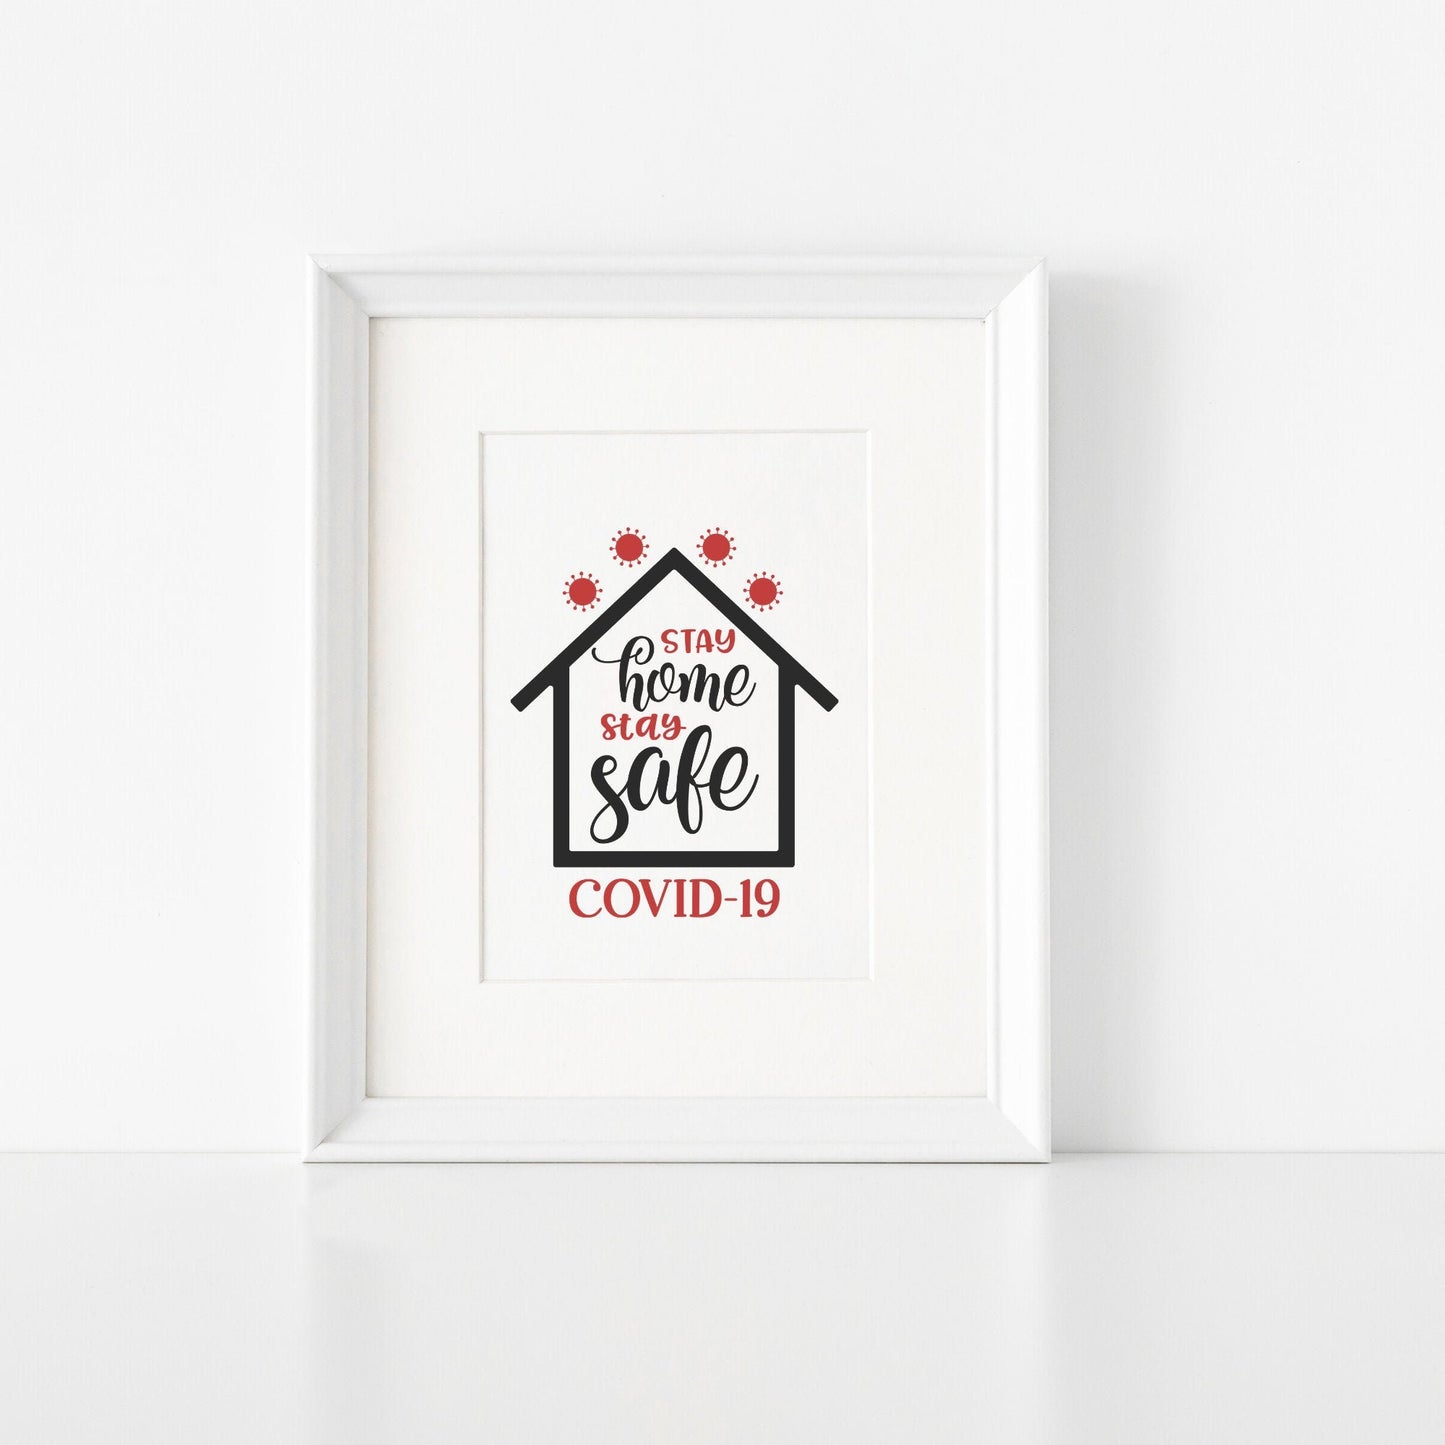 Stay Home and Safe COVID Printable~Social Distancing Sign